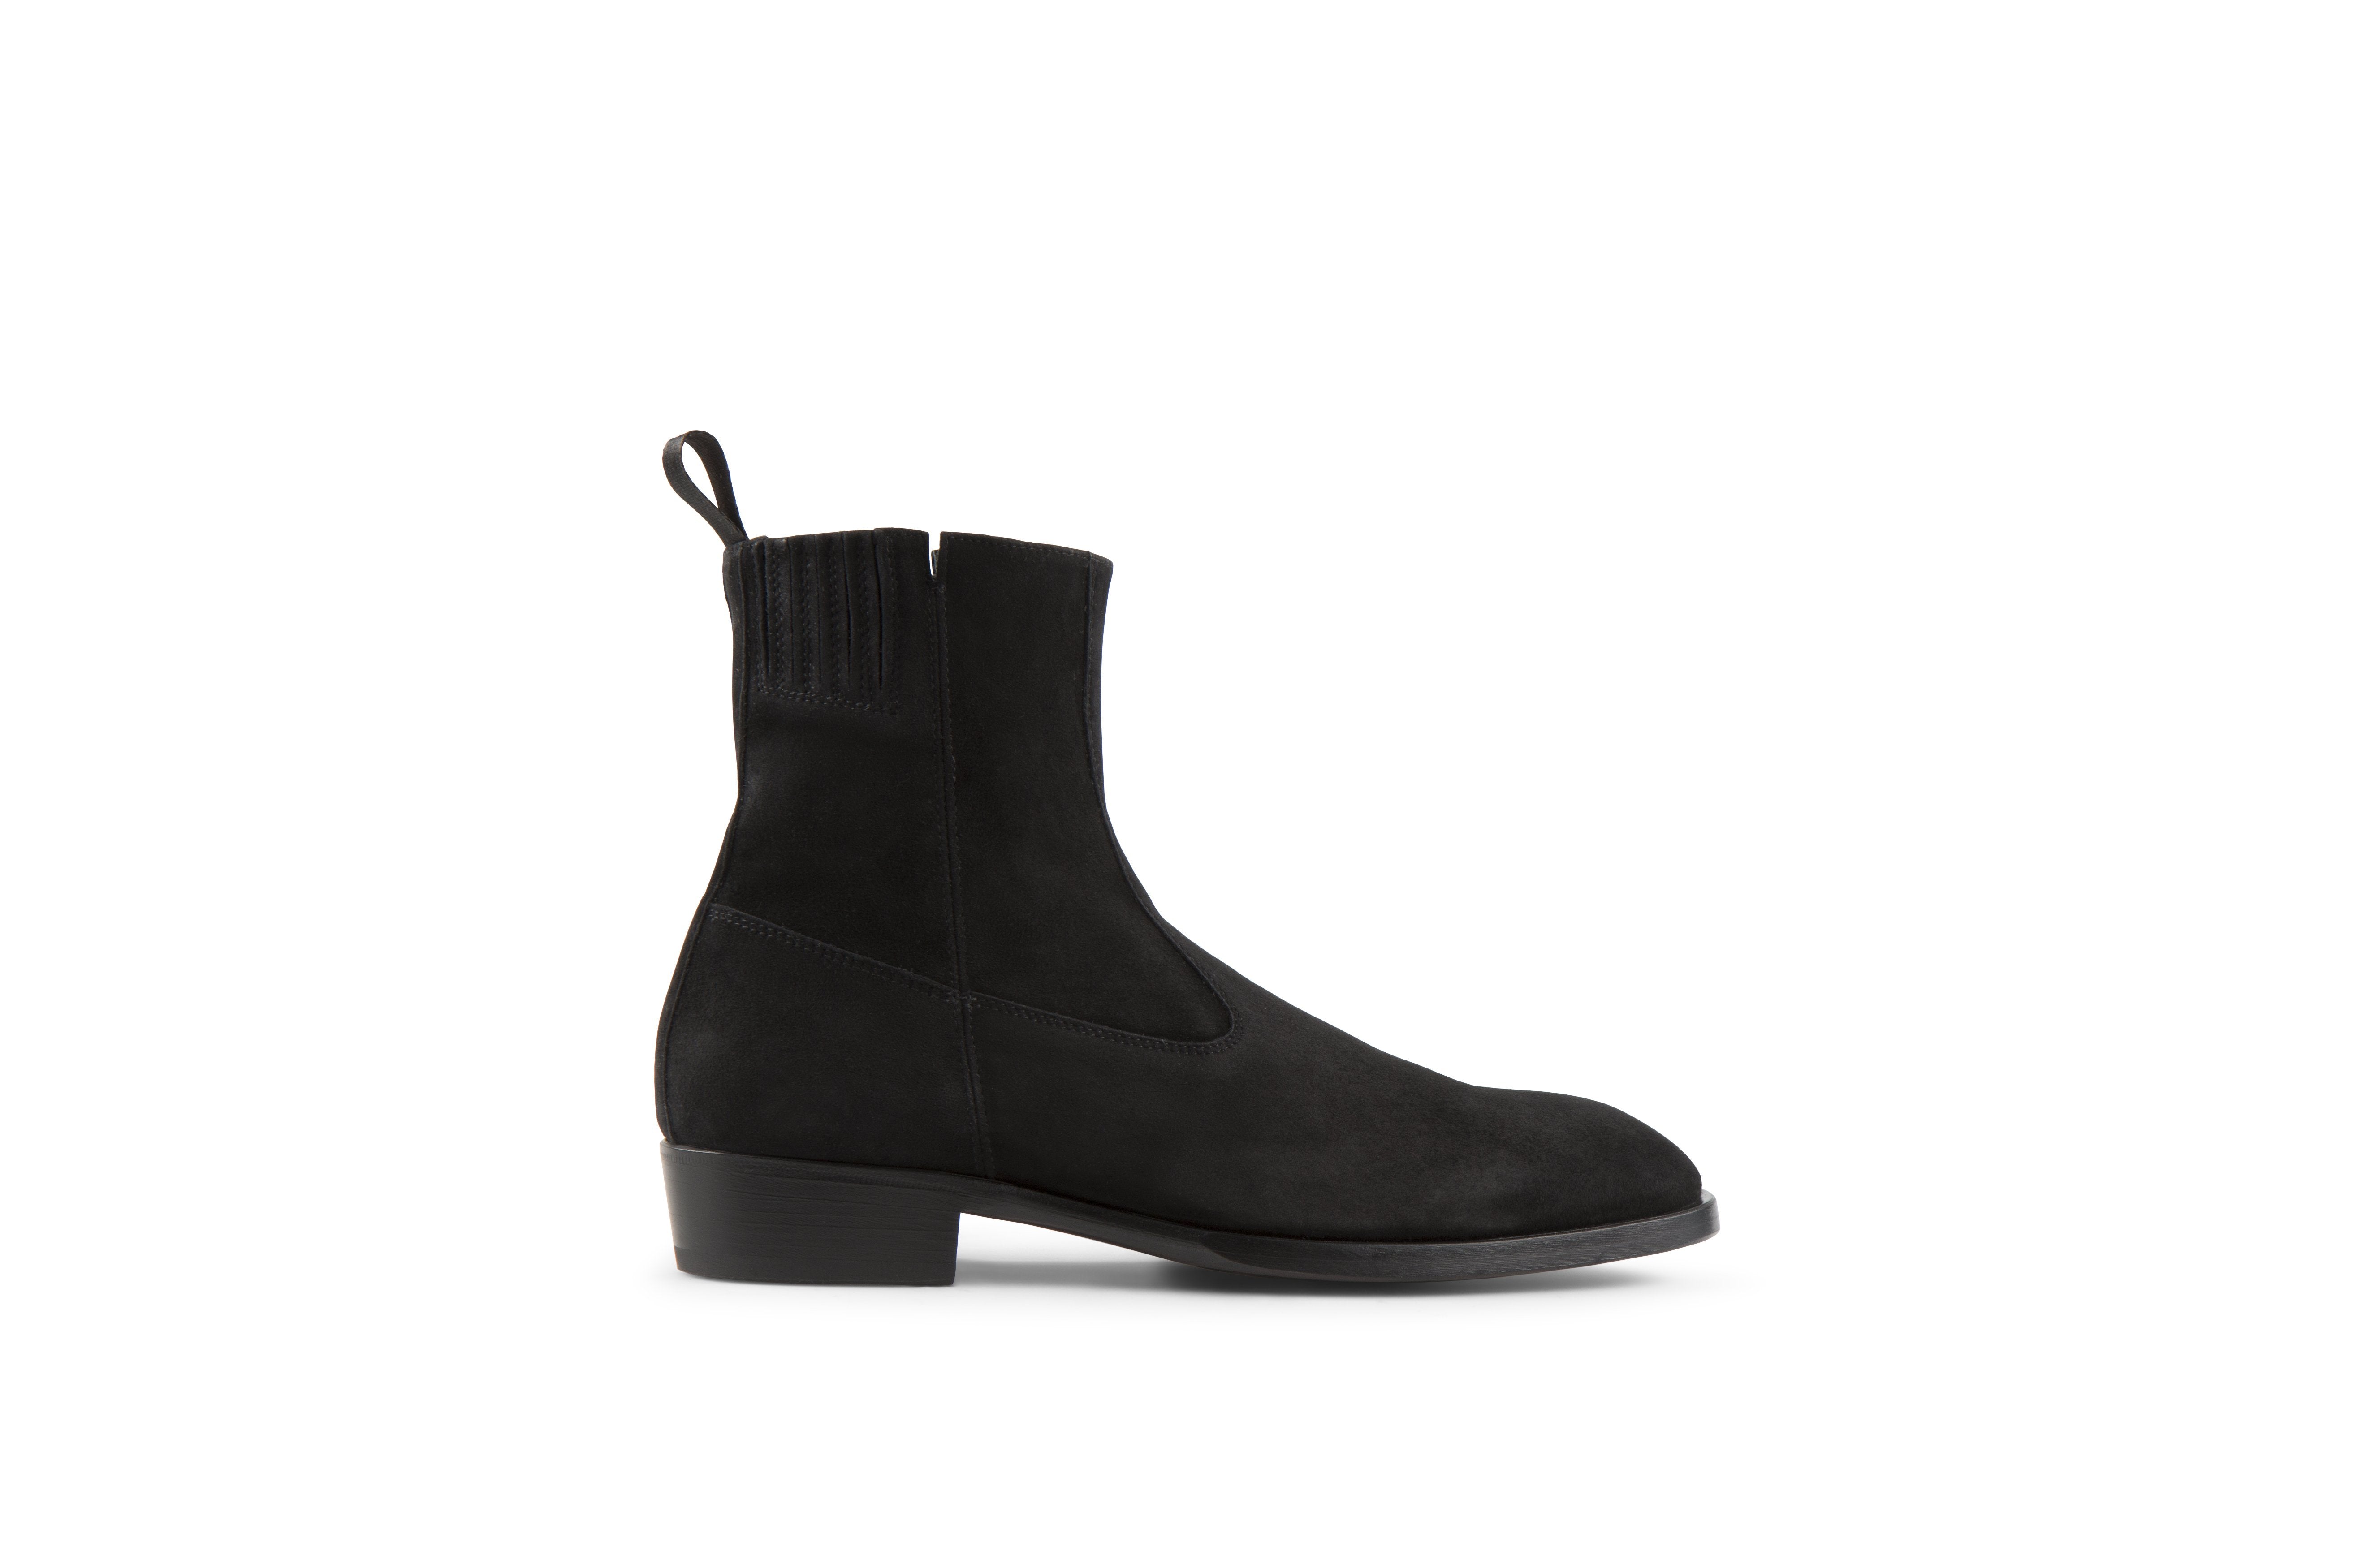 Hellstrom Black Suede Leather Zipper Boots